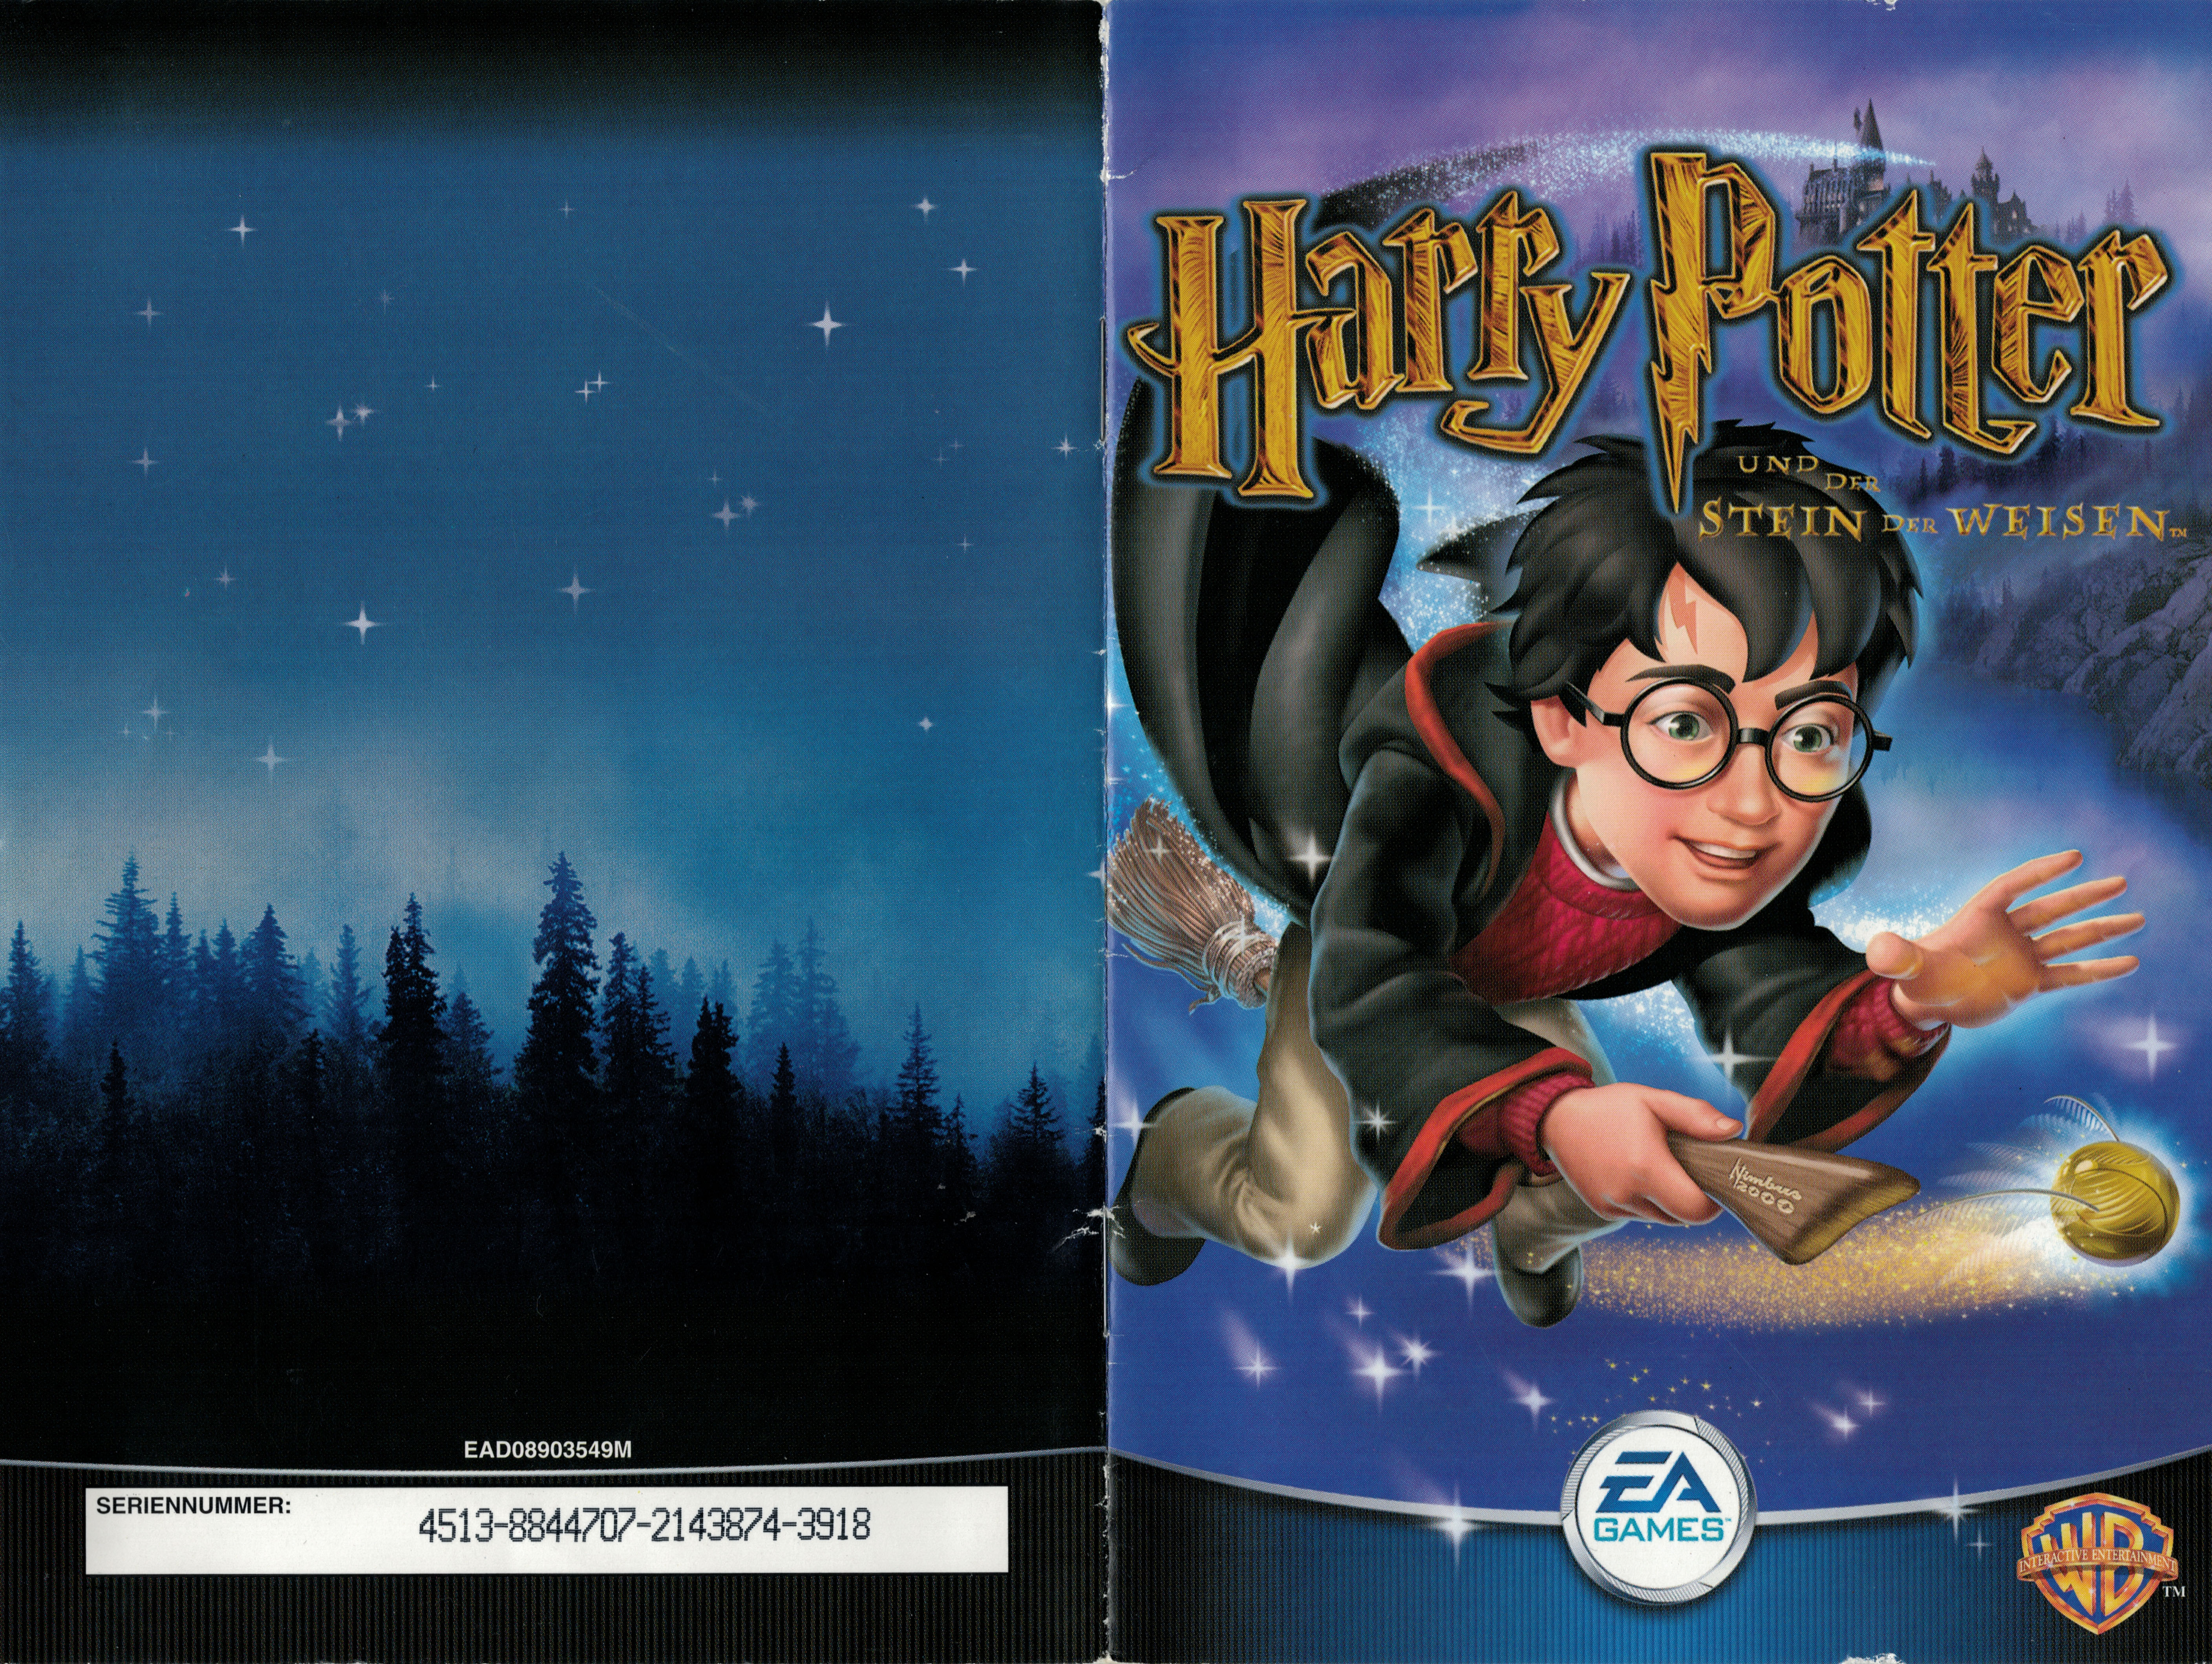 Harry Potter Und Der Stein Der Weisen Harry Potter And The Sorcerer S Stone Pc Game Manual De Electronic Arts Free Download Borrow And Streaming Internet Archive